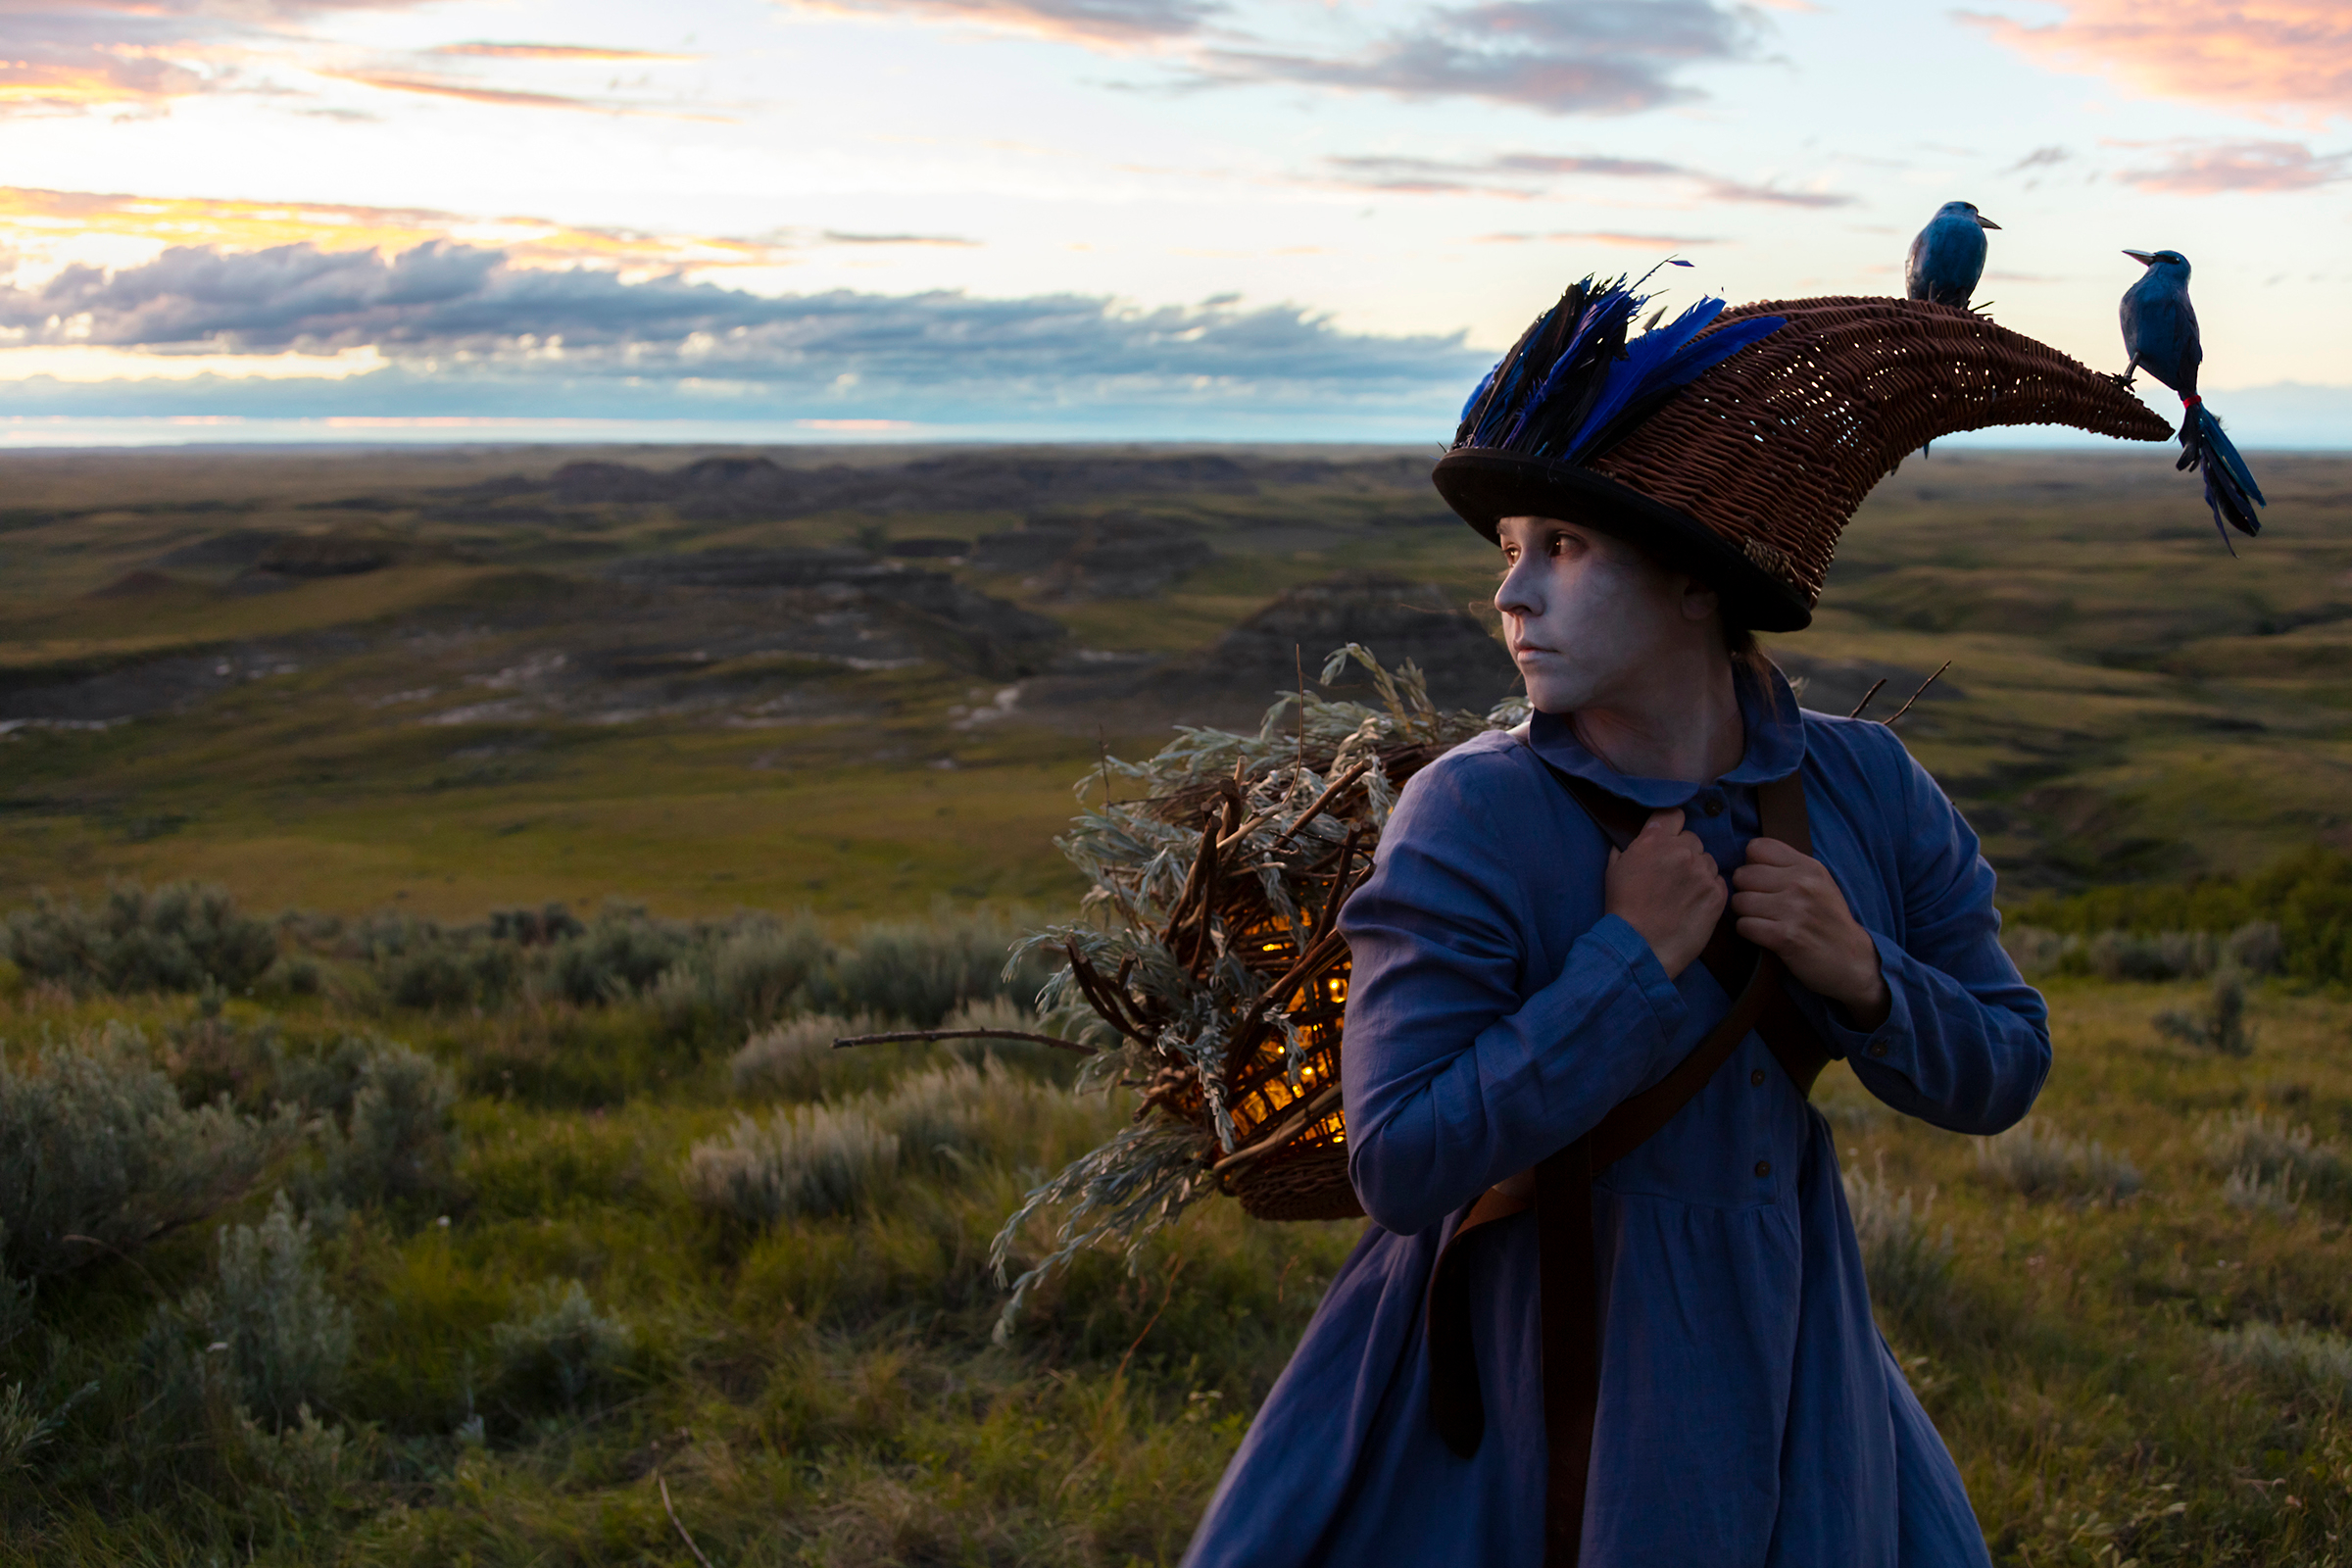     Meryl McMaster, Lead Me to Places I Could Never Find on My Own, 2019. From the series As Immense as the Sky. Courtesy of the artist, Stephen Bulger Gallery and Pierre-François Ouellette art contemporain.

